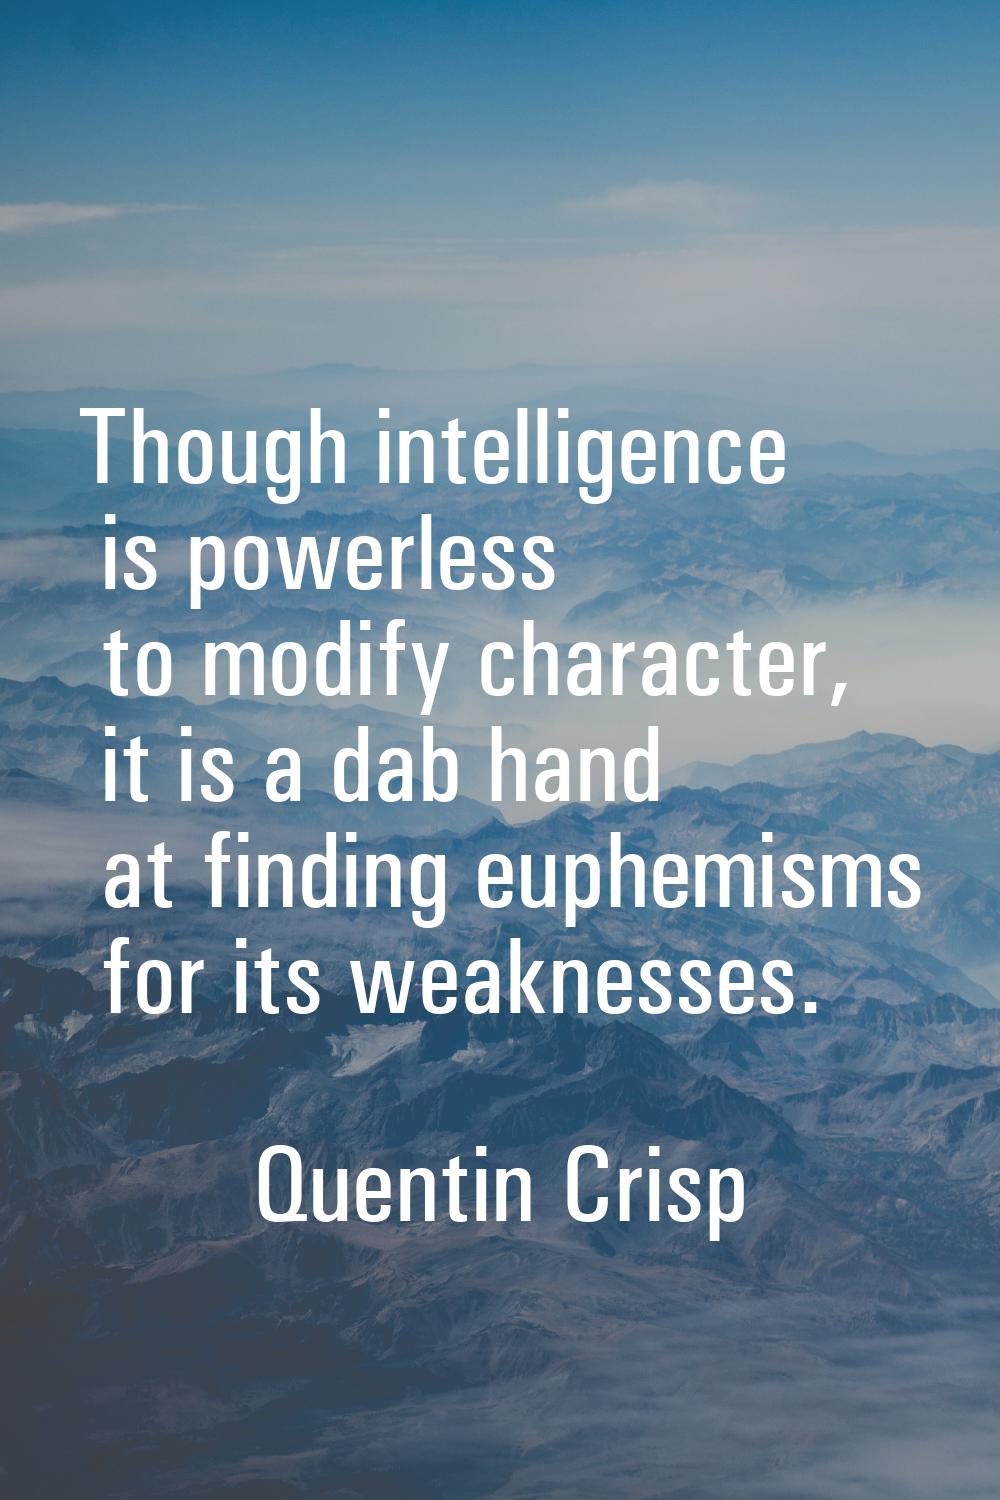 Though intelligence is powerless to modify character, it is a dab hand at finding euphemisms for it